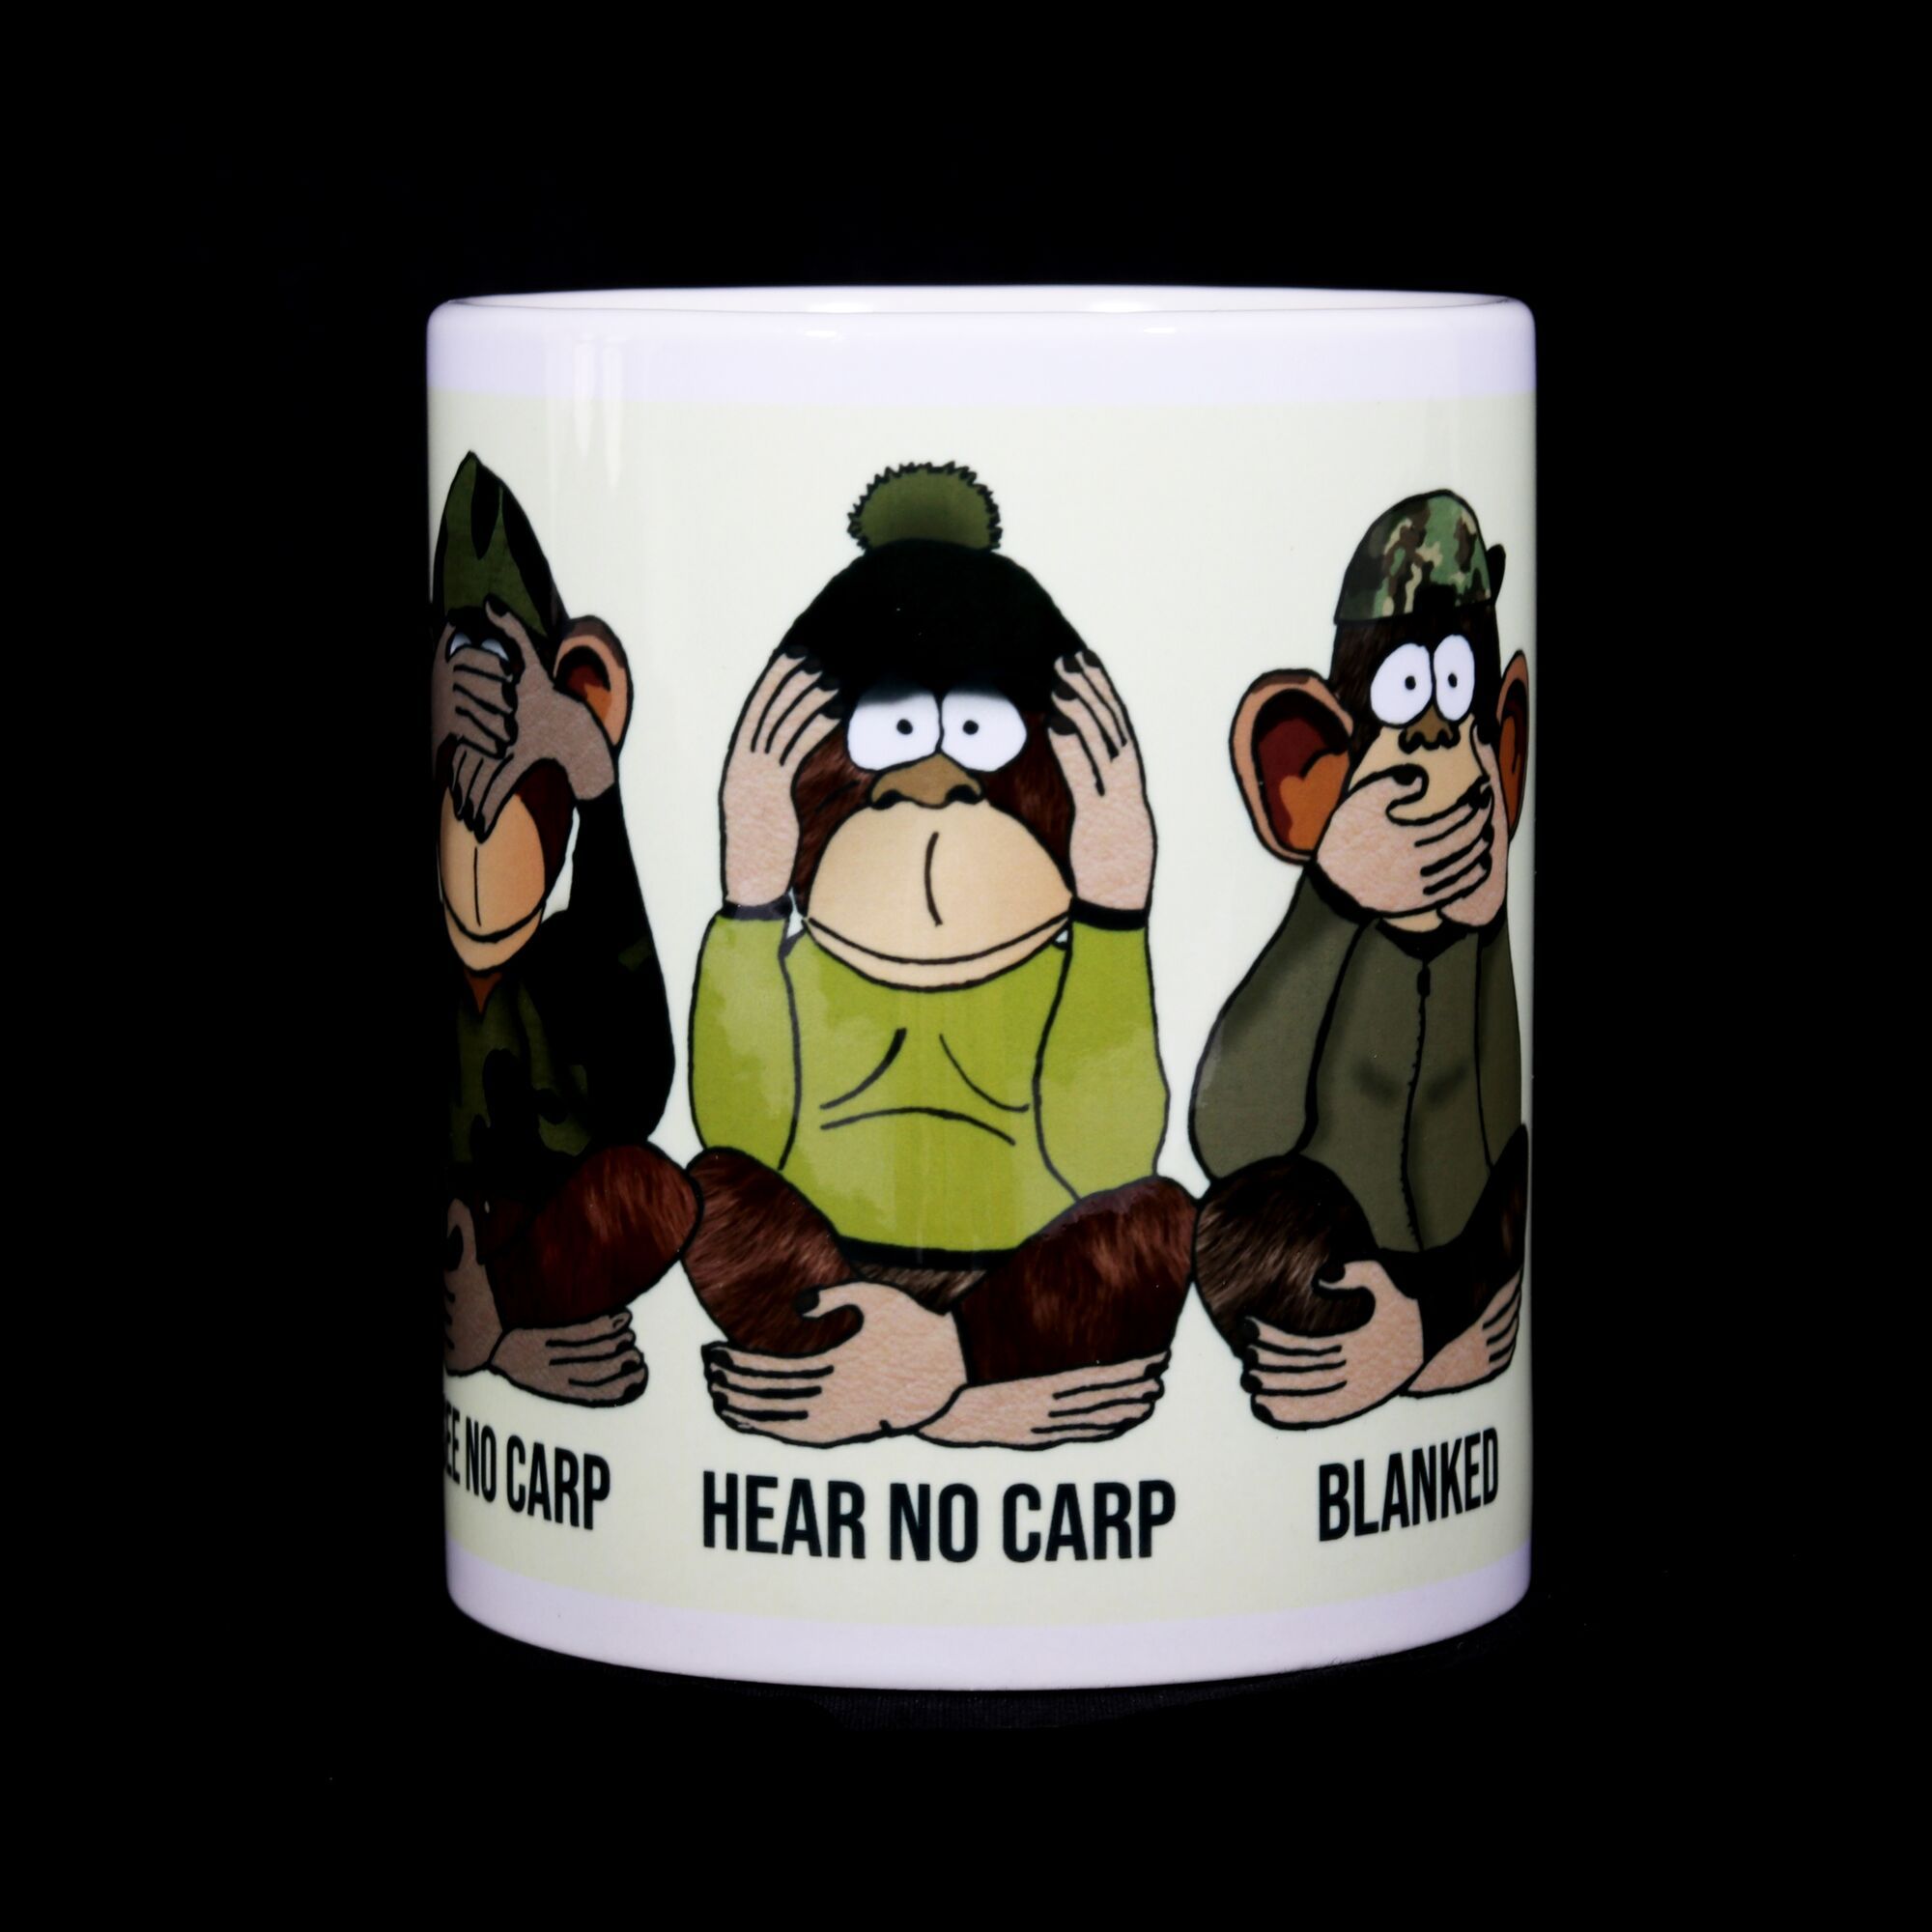 Carp Fishing Face Covering Three Unwise Monkeys From The Squirrels Nuts